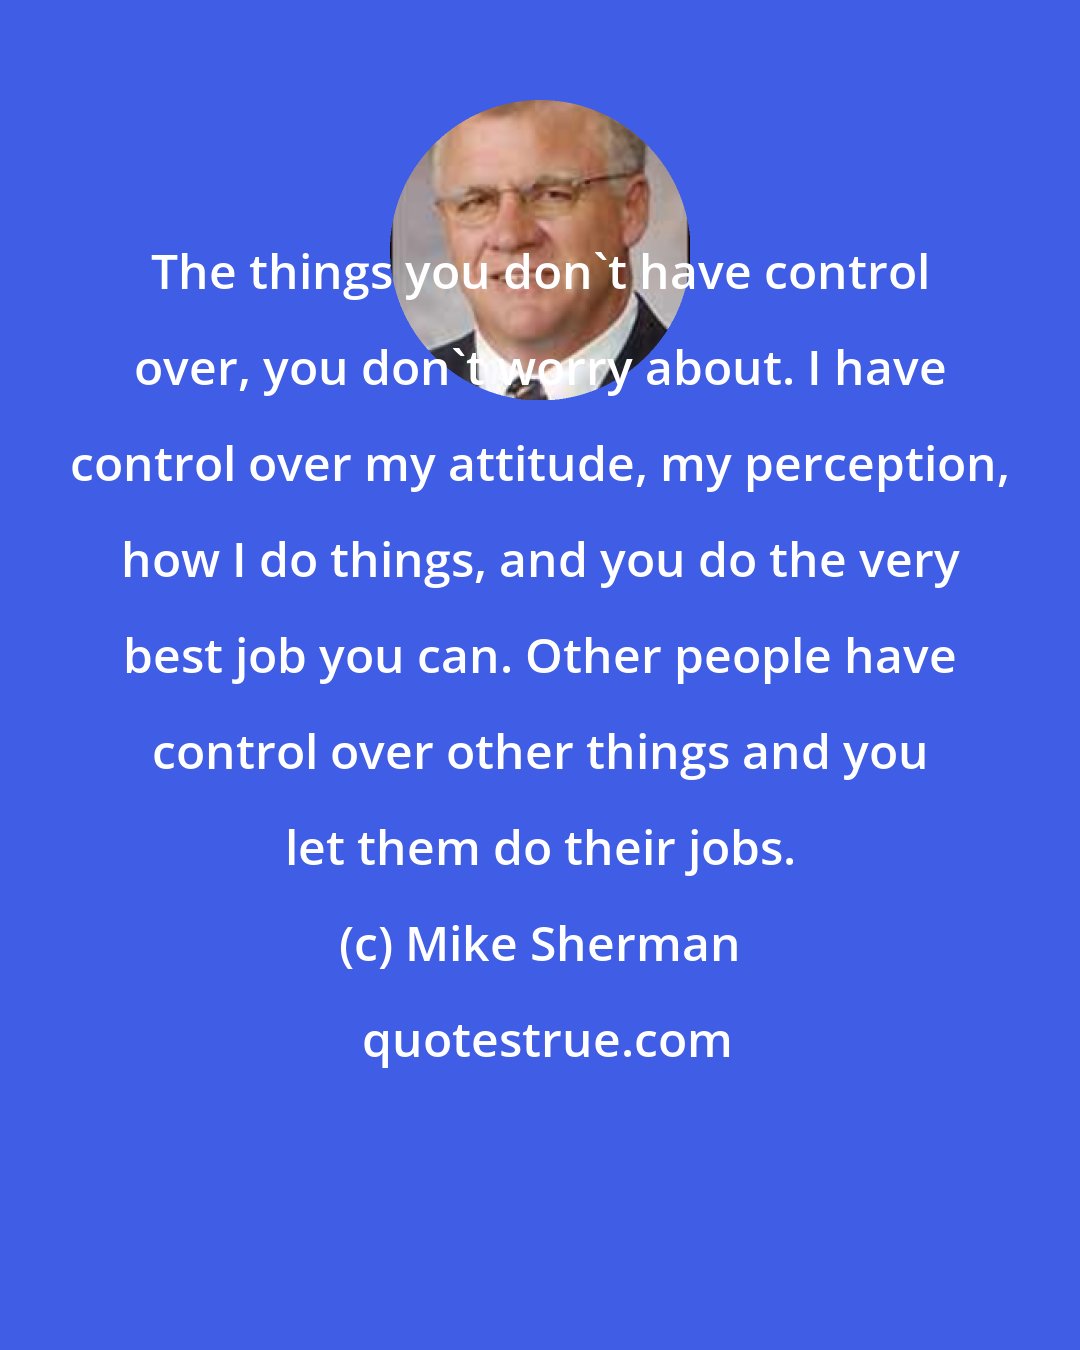 Mike Sherman: The things you don't have control over, you don't worry about. I have control over my attitude, my perception, how I do things, and you do the very best job you can. Other people have control over other things and you let them do their jobs.